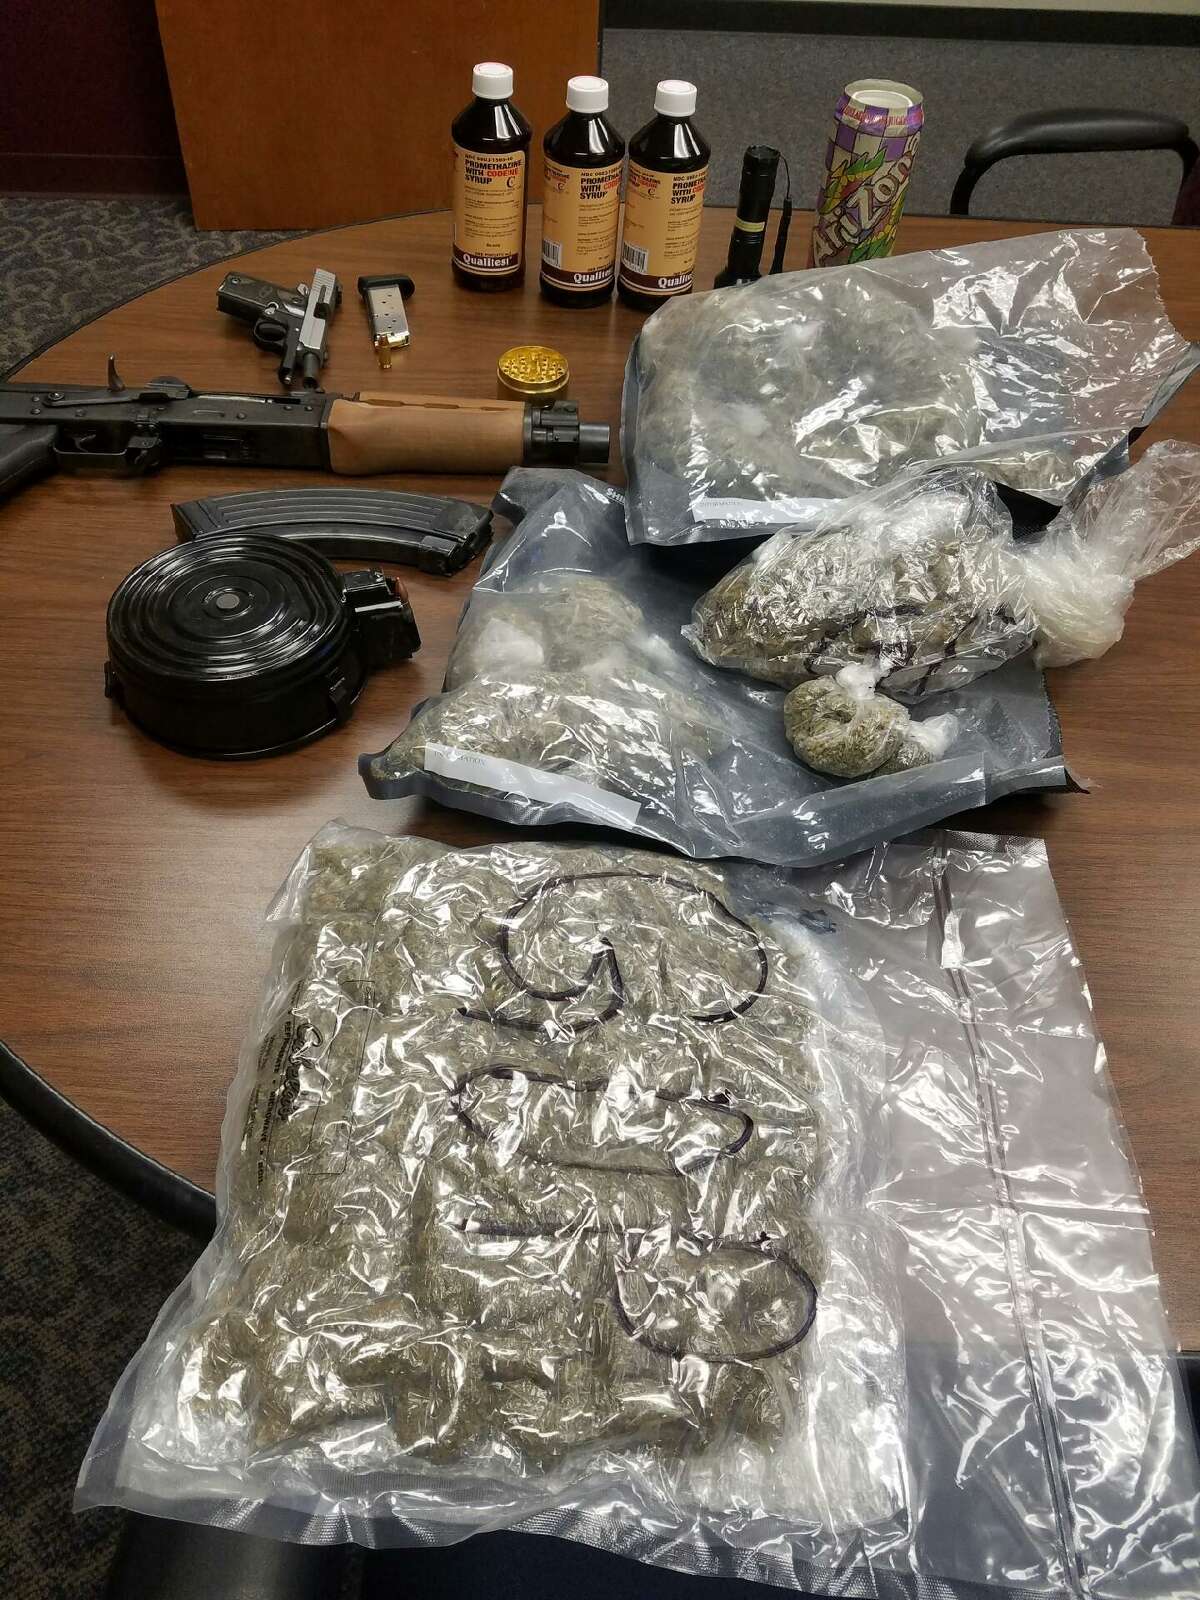 Jefferson County Sheriff's Office detectives arrested three men on drug charges and confiscated a loaded assault rifle and pistol during an investigation Thursday.